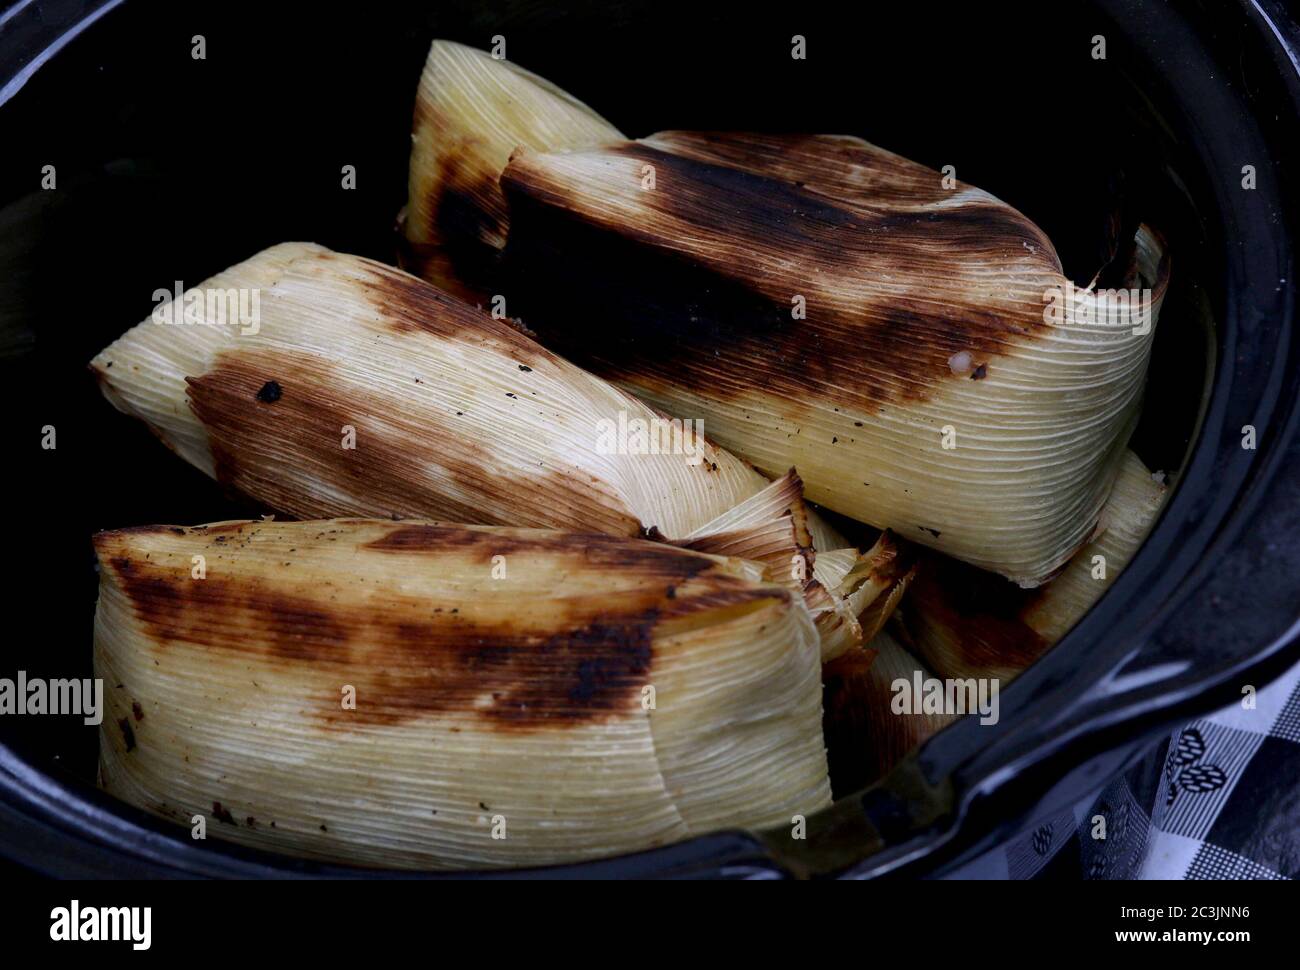 Three cooked tamales seen at a street fair Stock Photo